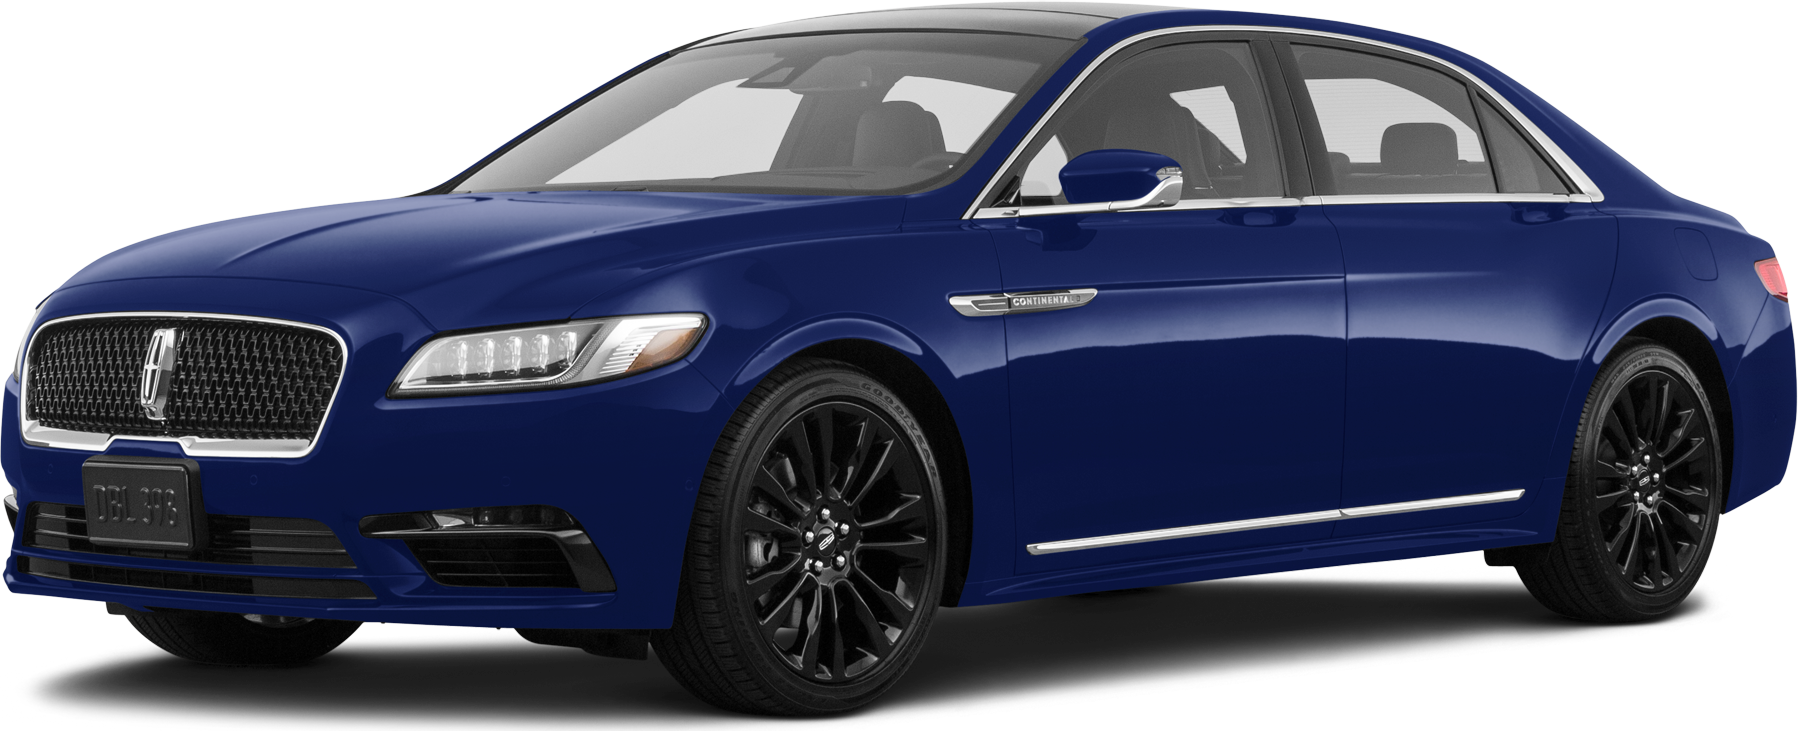 https://file.kelleybluebookimages.com/kbb/base/evox/CP/14295/2020-Lincoln-Continental-front_14295_032_1798x731_N5_cropped.png